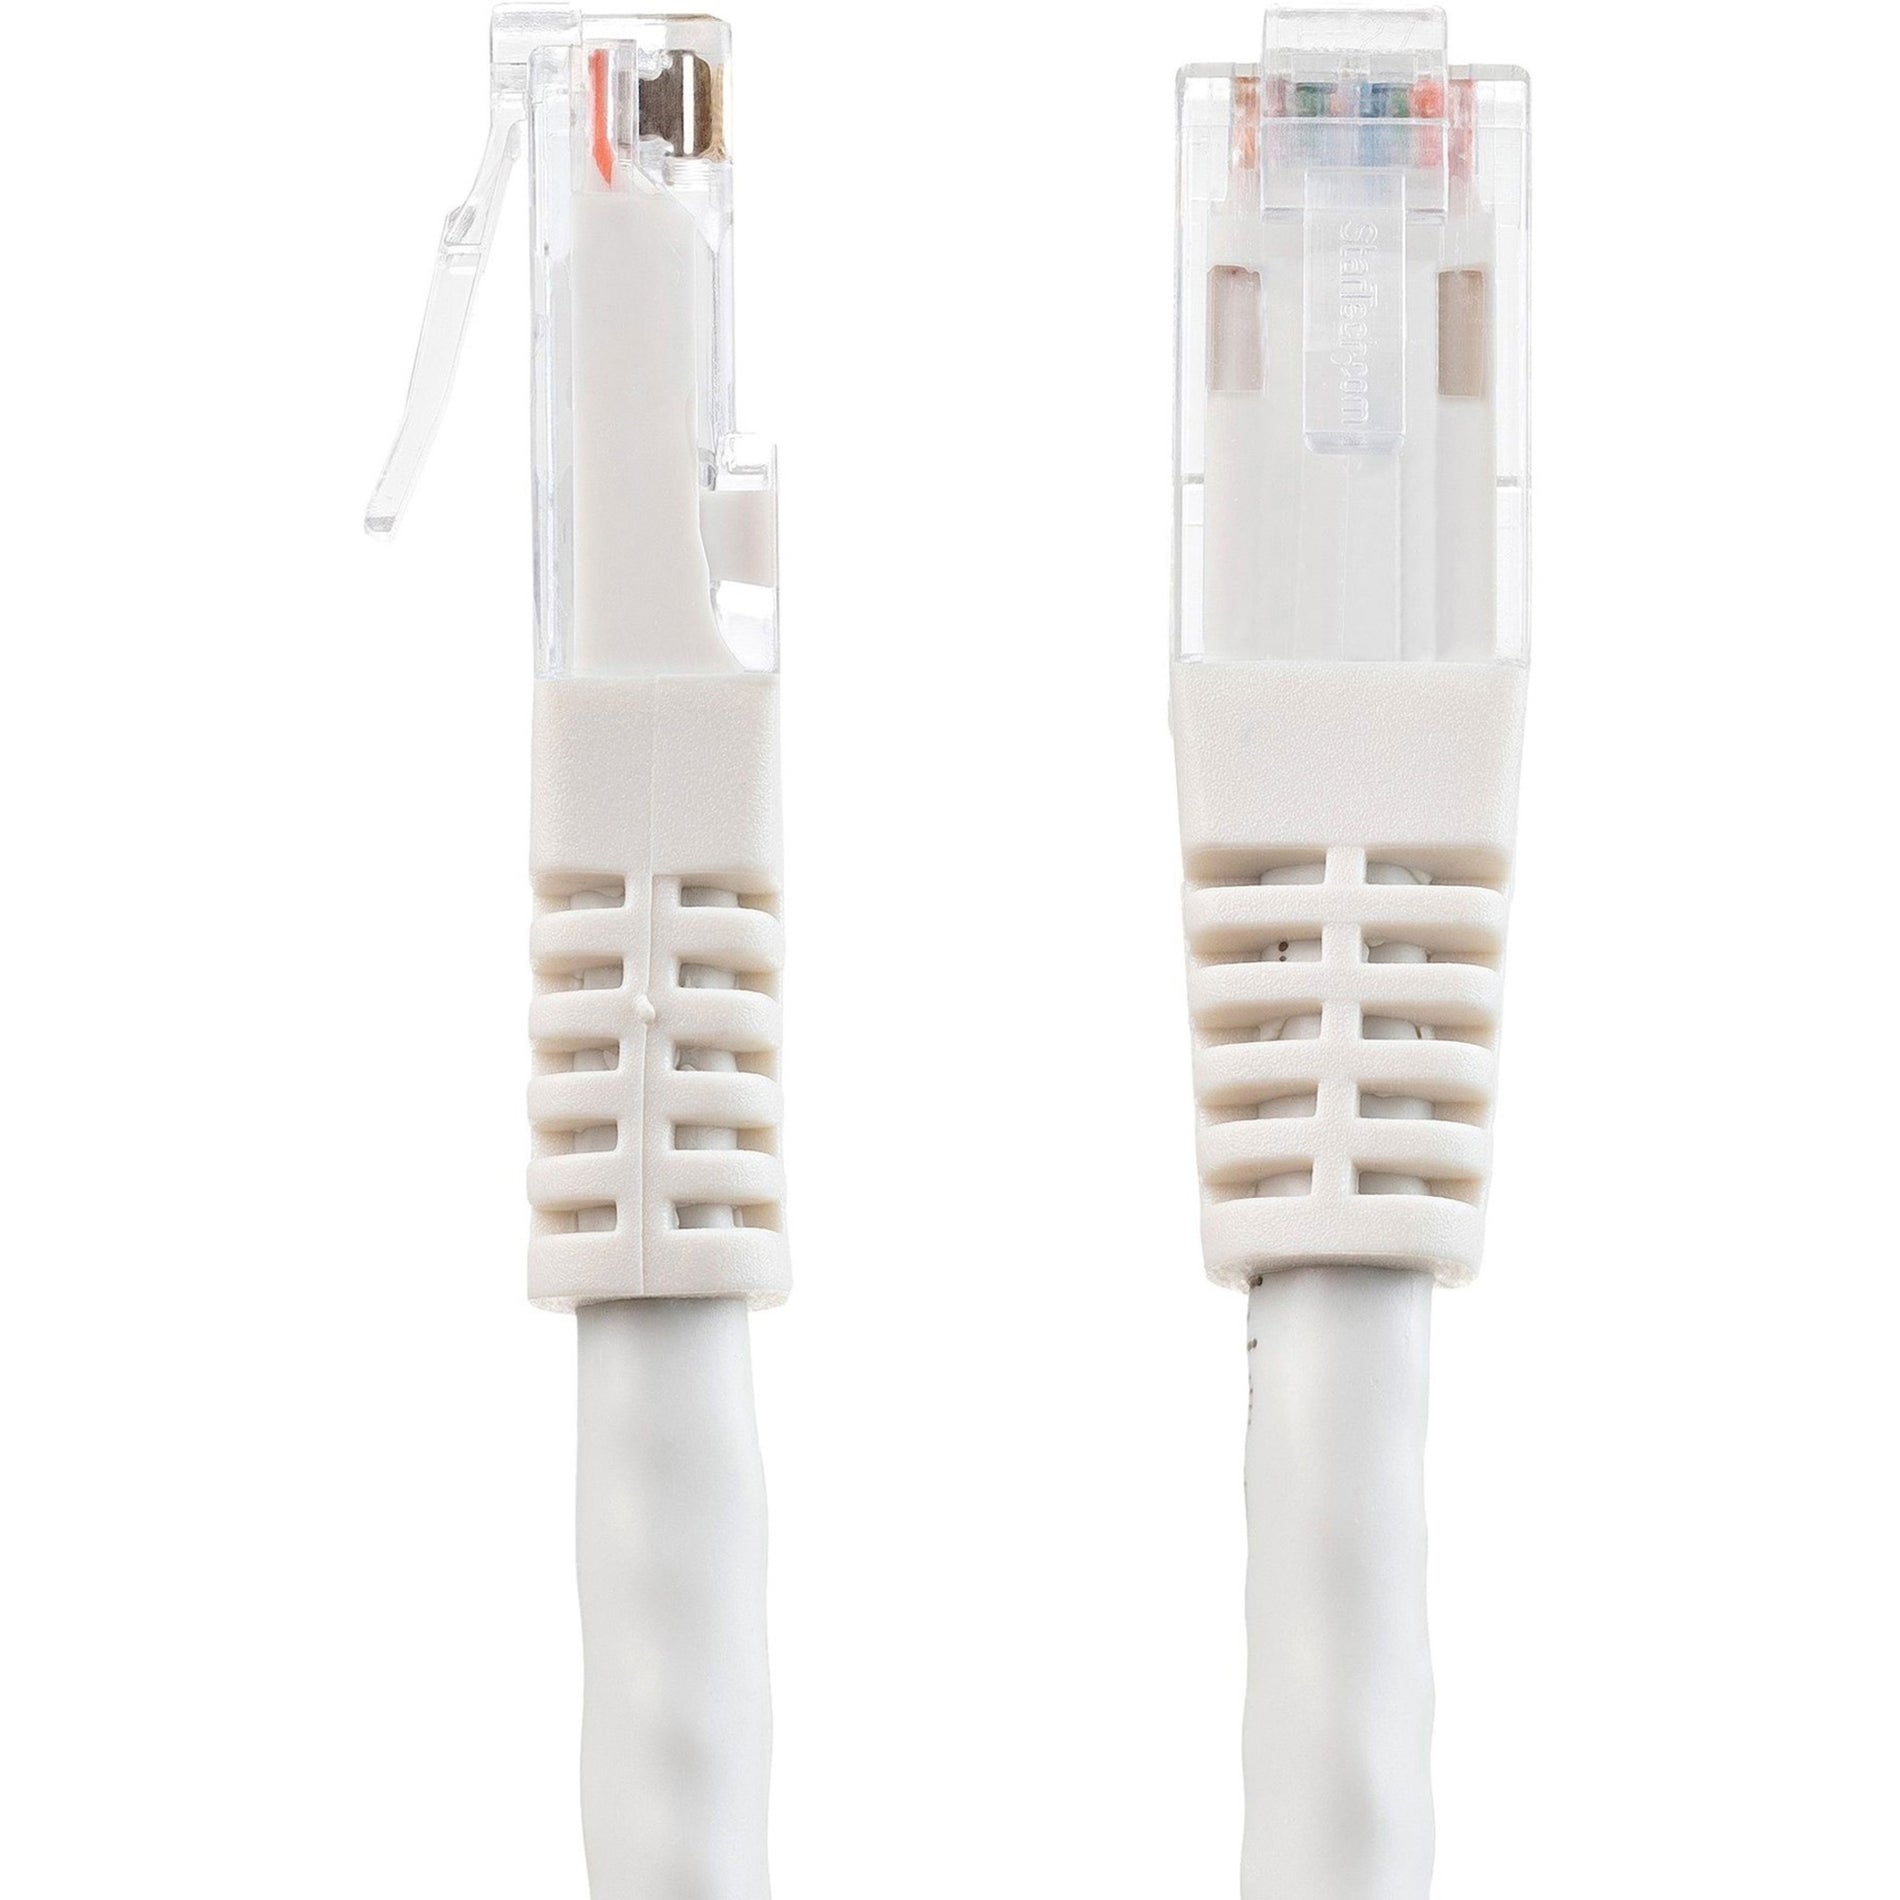 StarTech.com C6PATCH3WH 3ft White Cat6 UTP Patch Cable ETL Verified, 10 Gbit/s Data Transfer Rate, Gold Plated Connectors